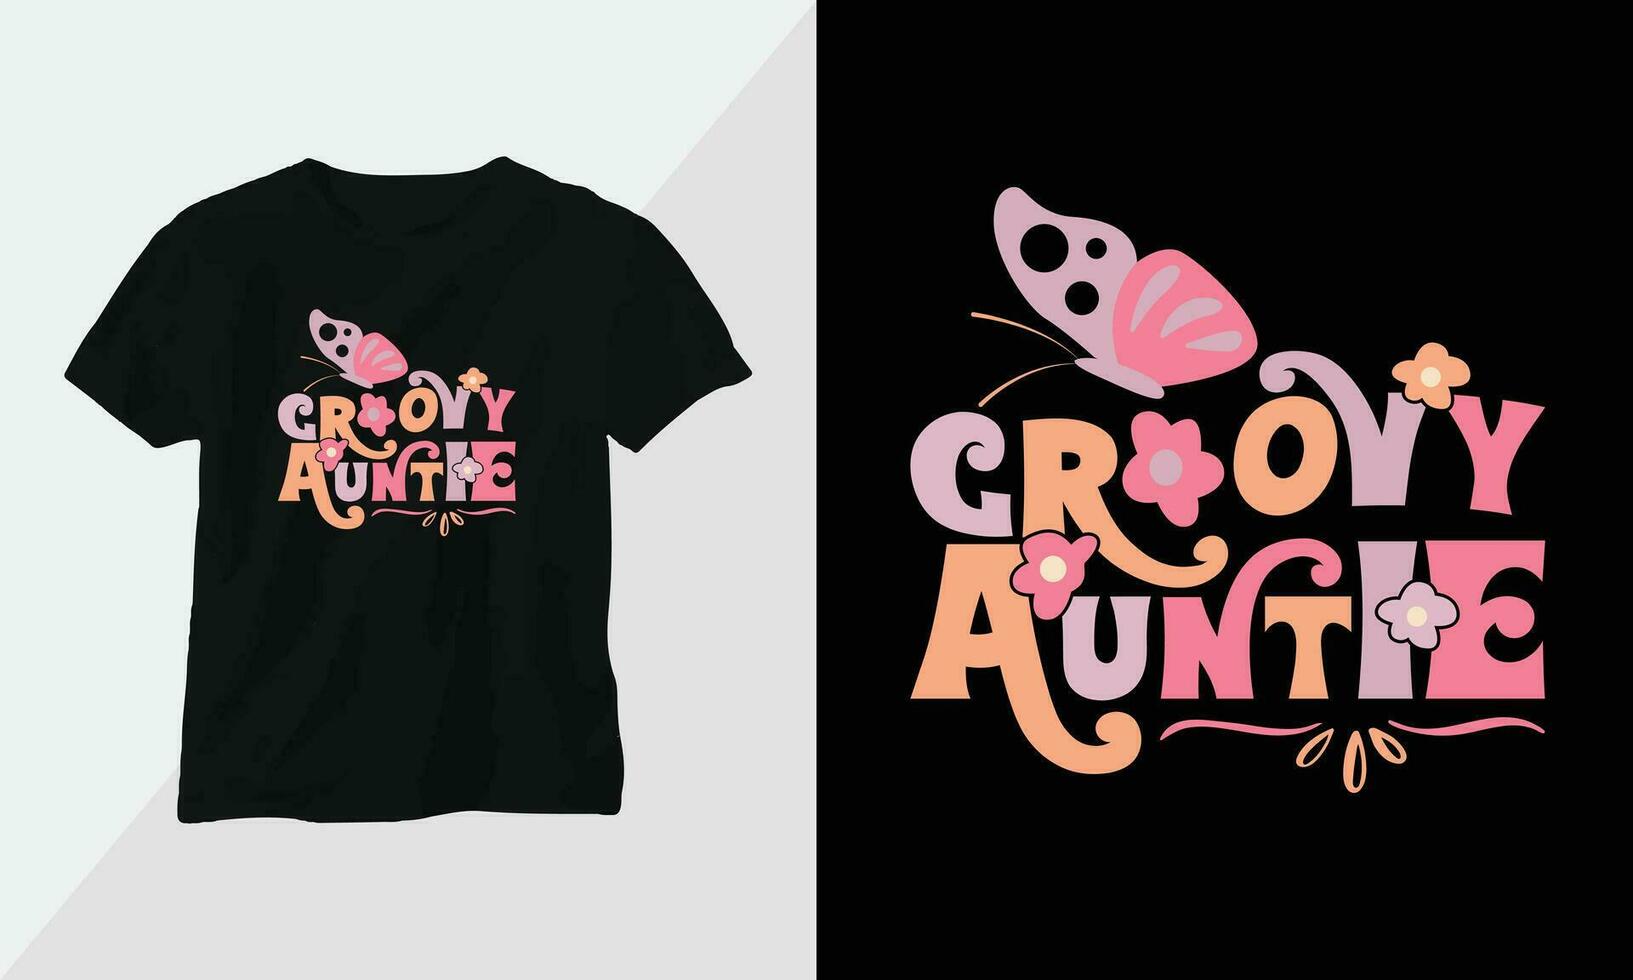 groovy Auntie - Retro Groovy Inspirational T-shirt Design with retro style vector